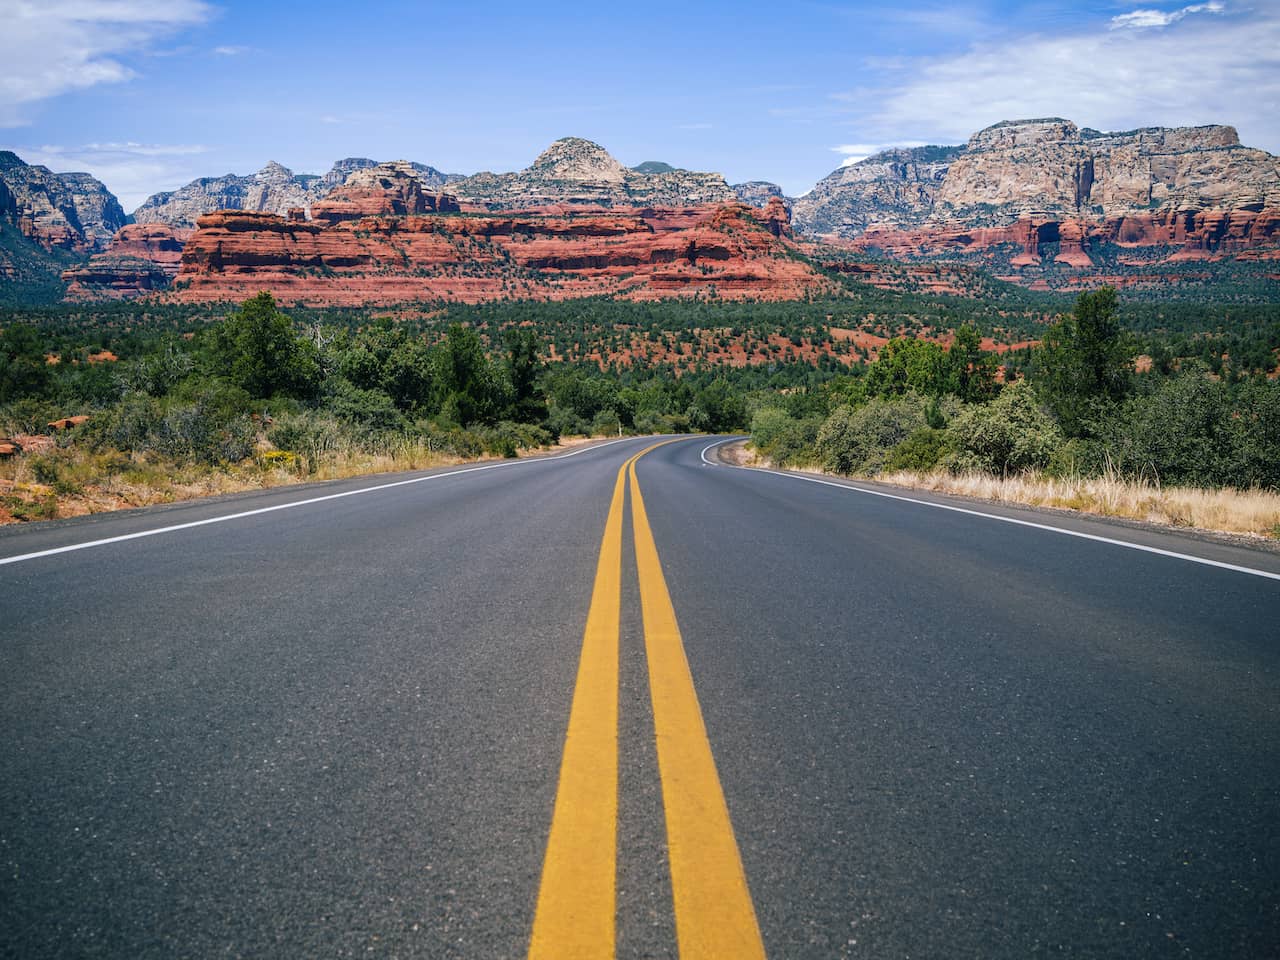 Road in Arizona with red rocks in the background.